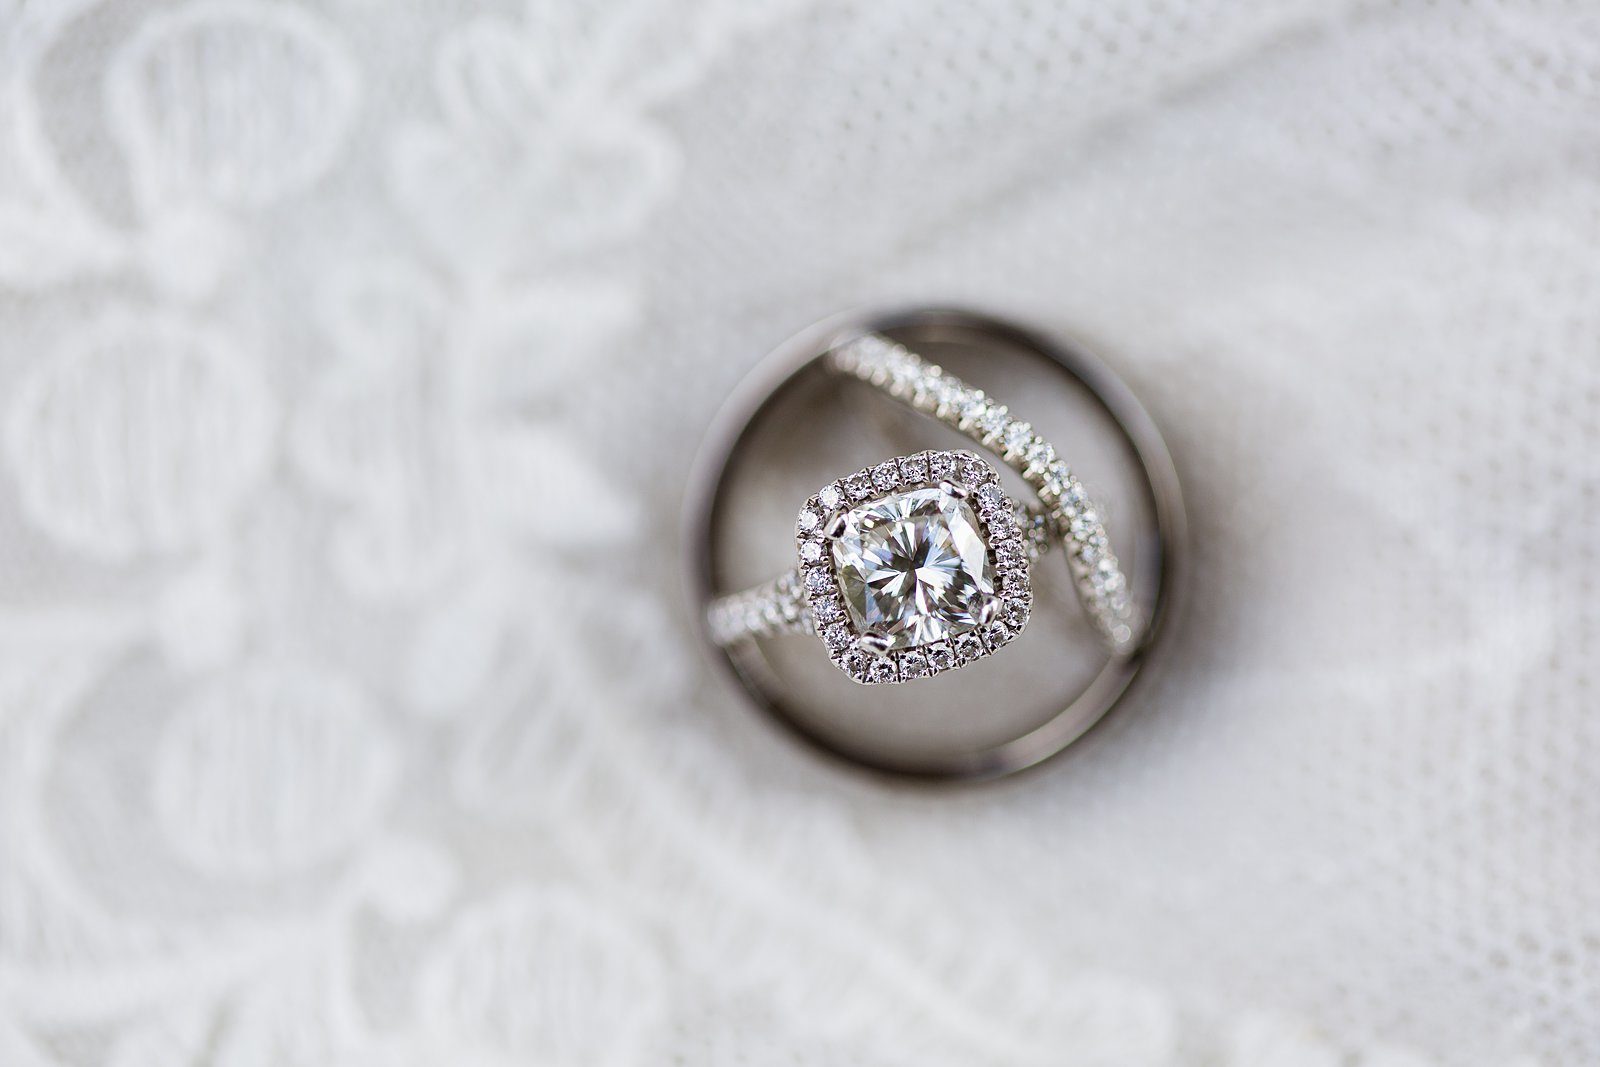 Square engagement ring and matching wedding band close up detail image by PMA Photography.